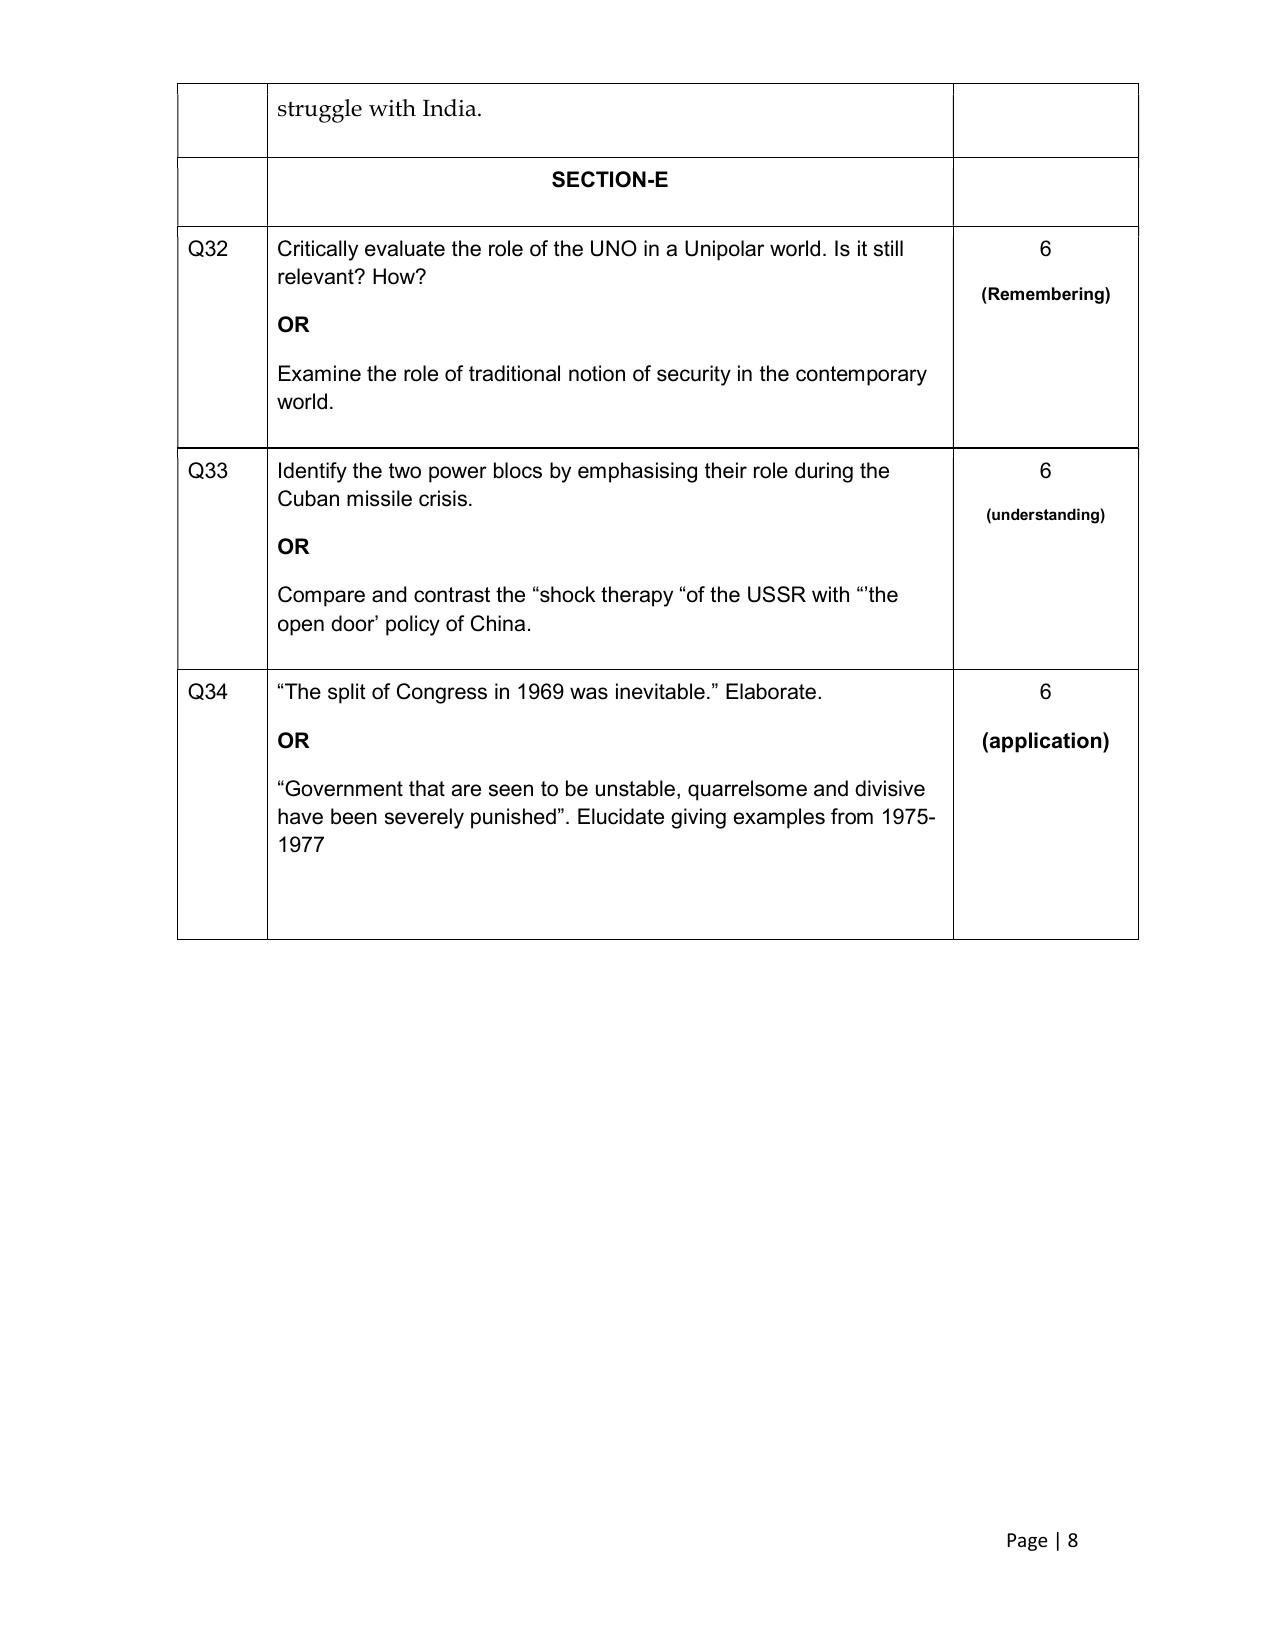 CBSE Class 12 Pol. Science -Sample Paper 2019-20 - Page 8